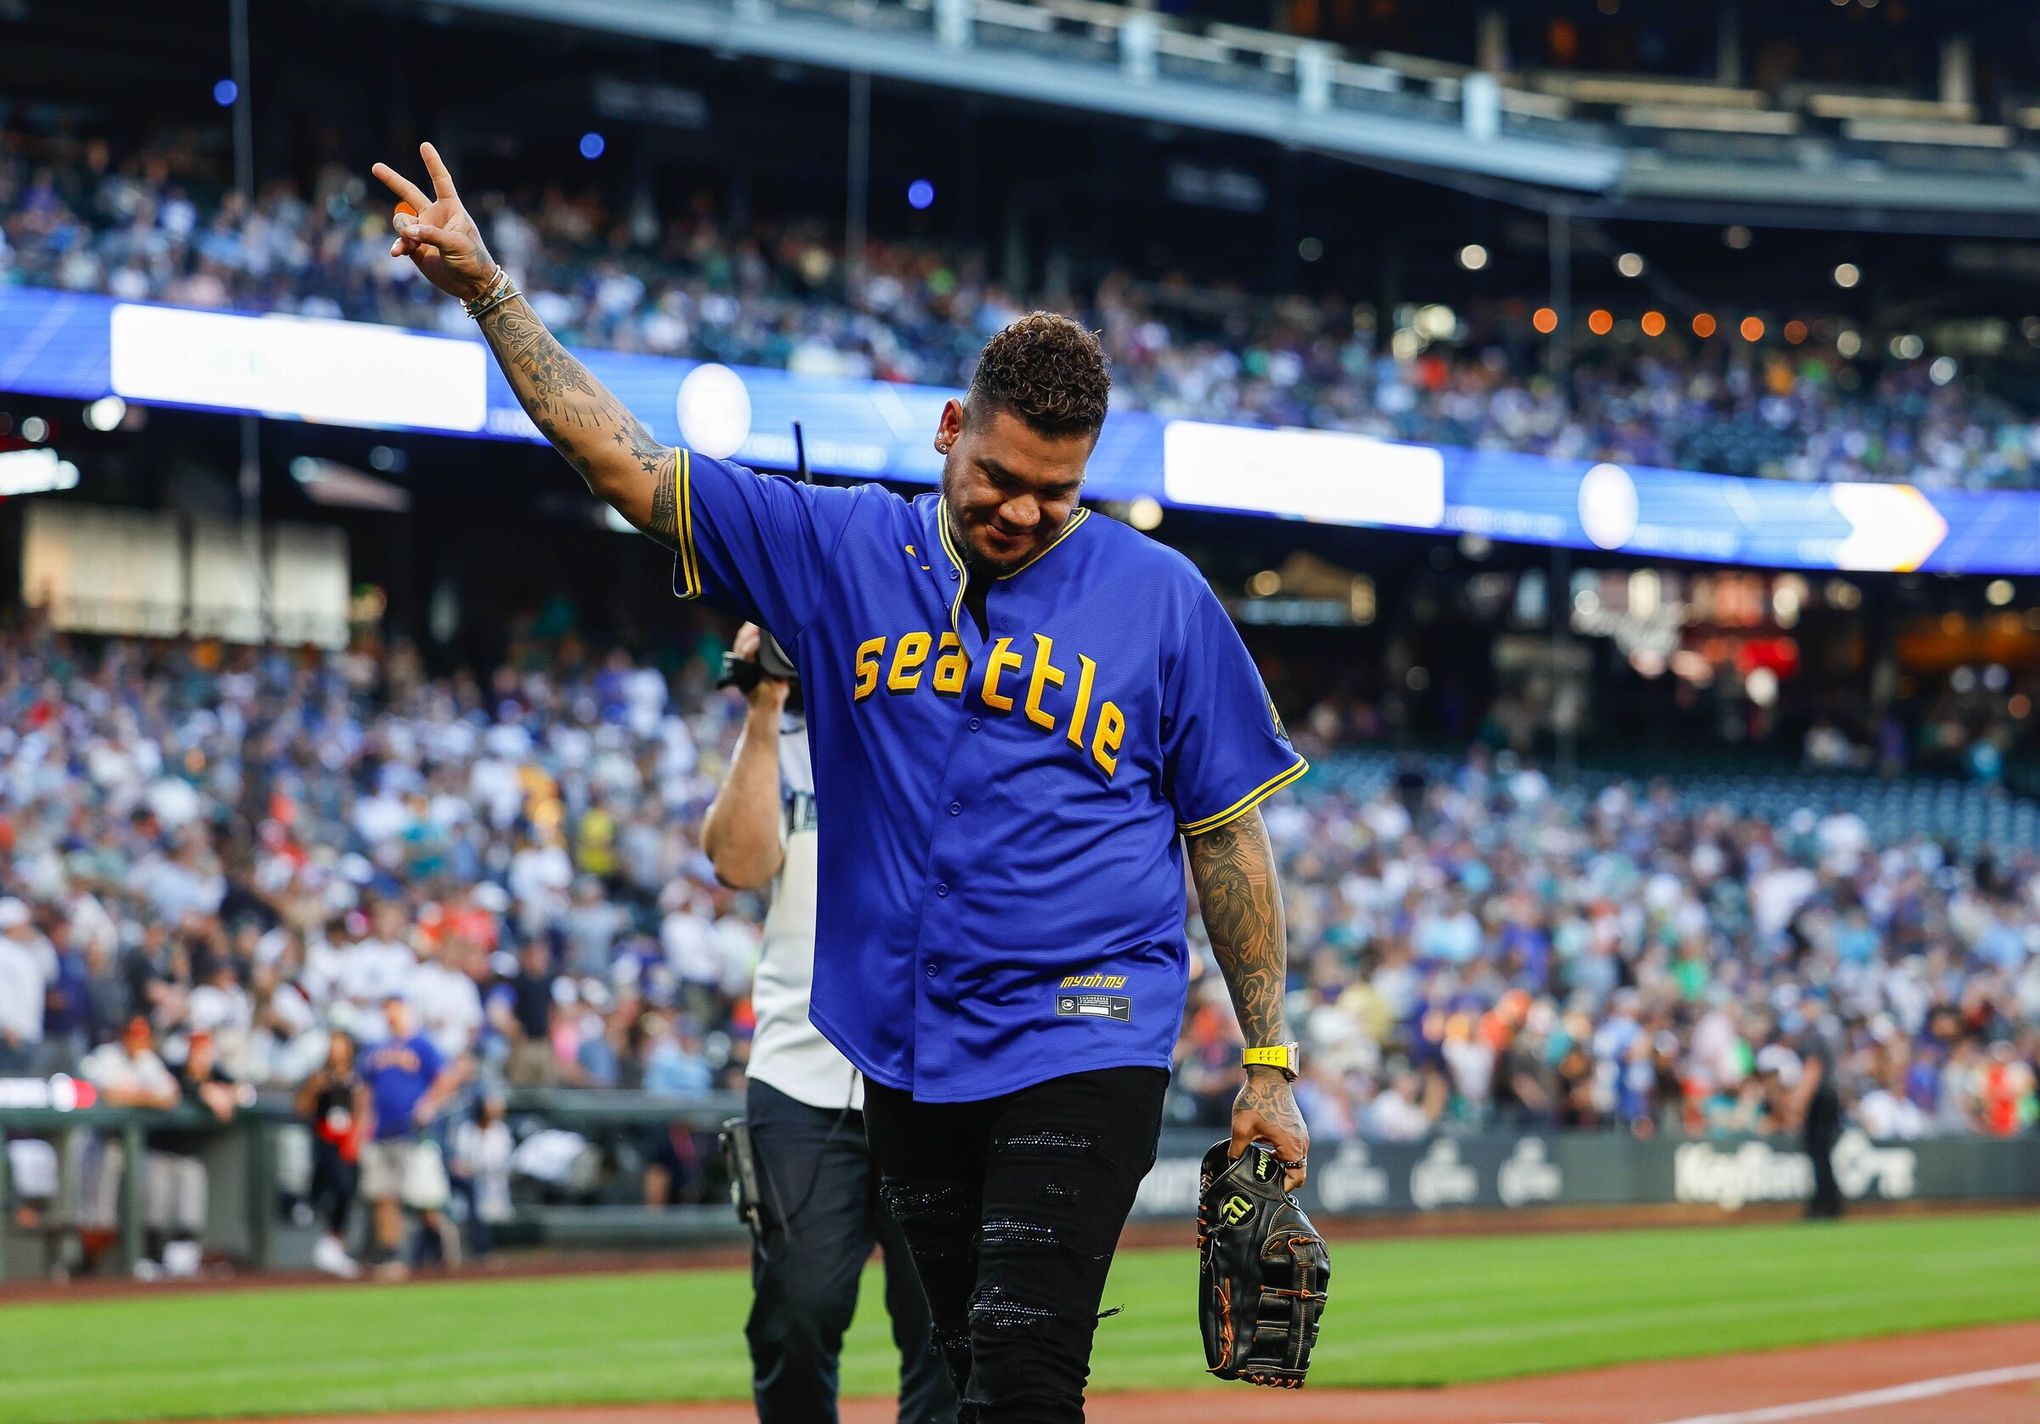 When Felix Hernandez is inducted into Mariners Hall of Fame, his Everett  host family will be watching